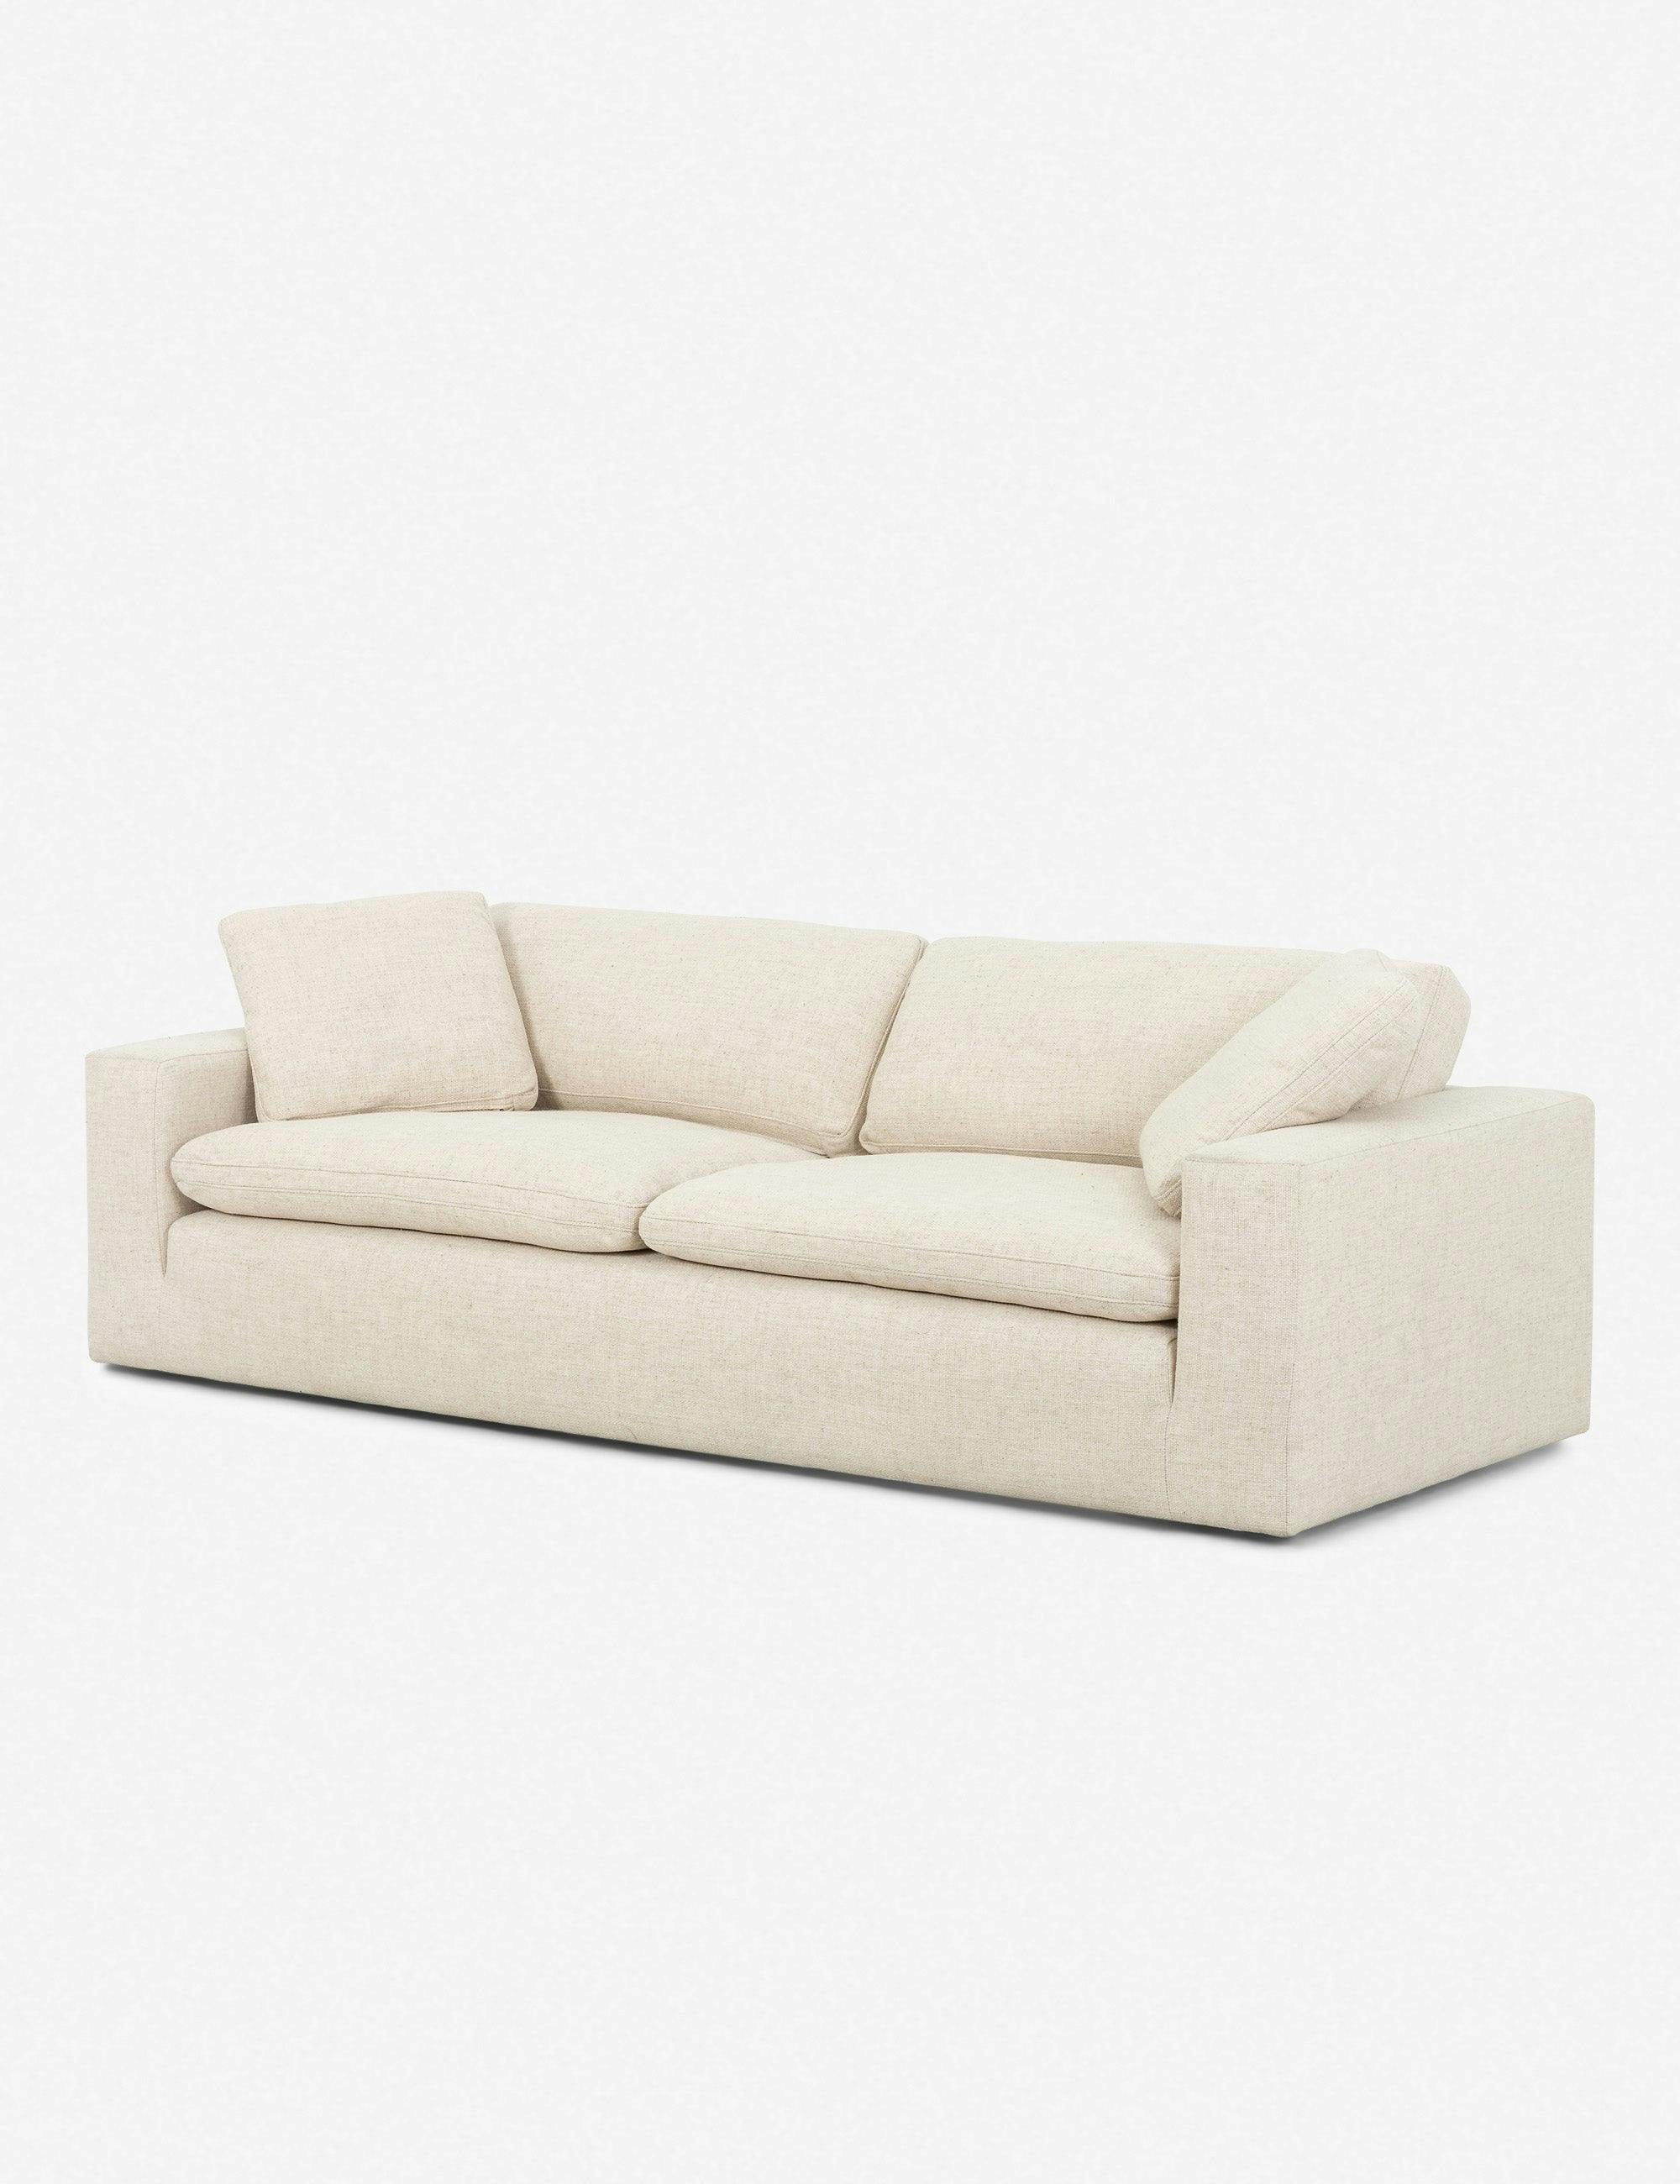 Thames Cream Casual Feather-Down Filled Plush Sofa 96.5"